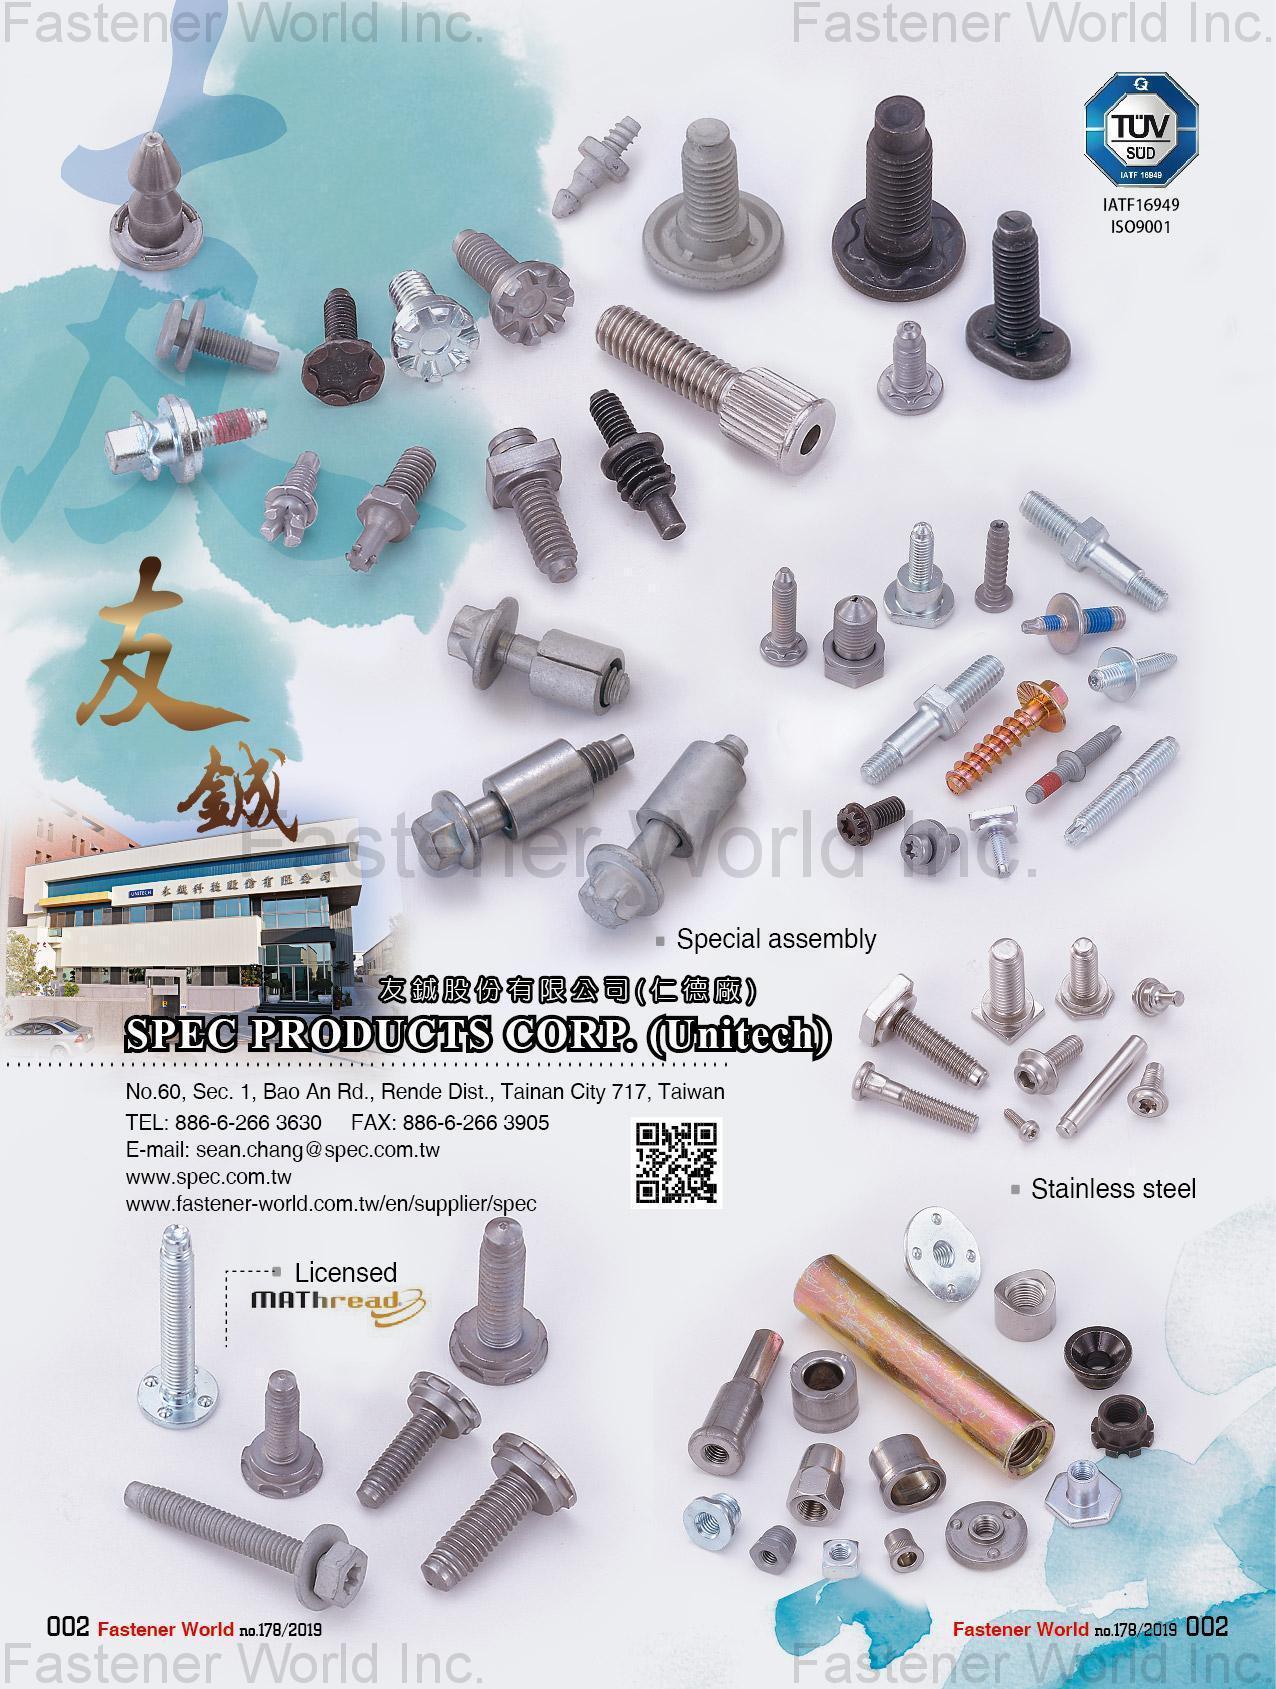 SPEC PRODUCTS CORP.  , Special assembly, Stainless Steel Screws, MAThread Licensed , Assembly Captive Screws